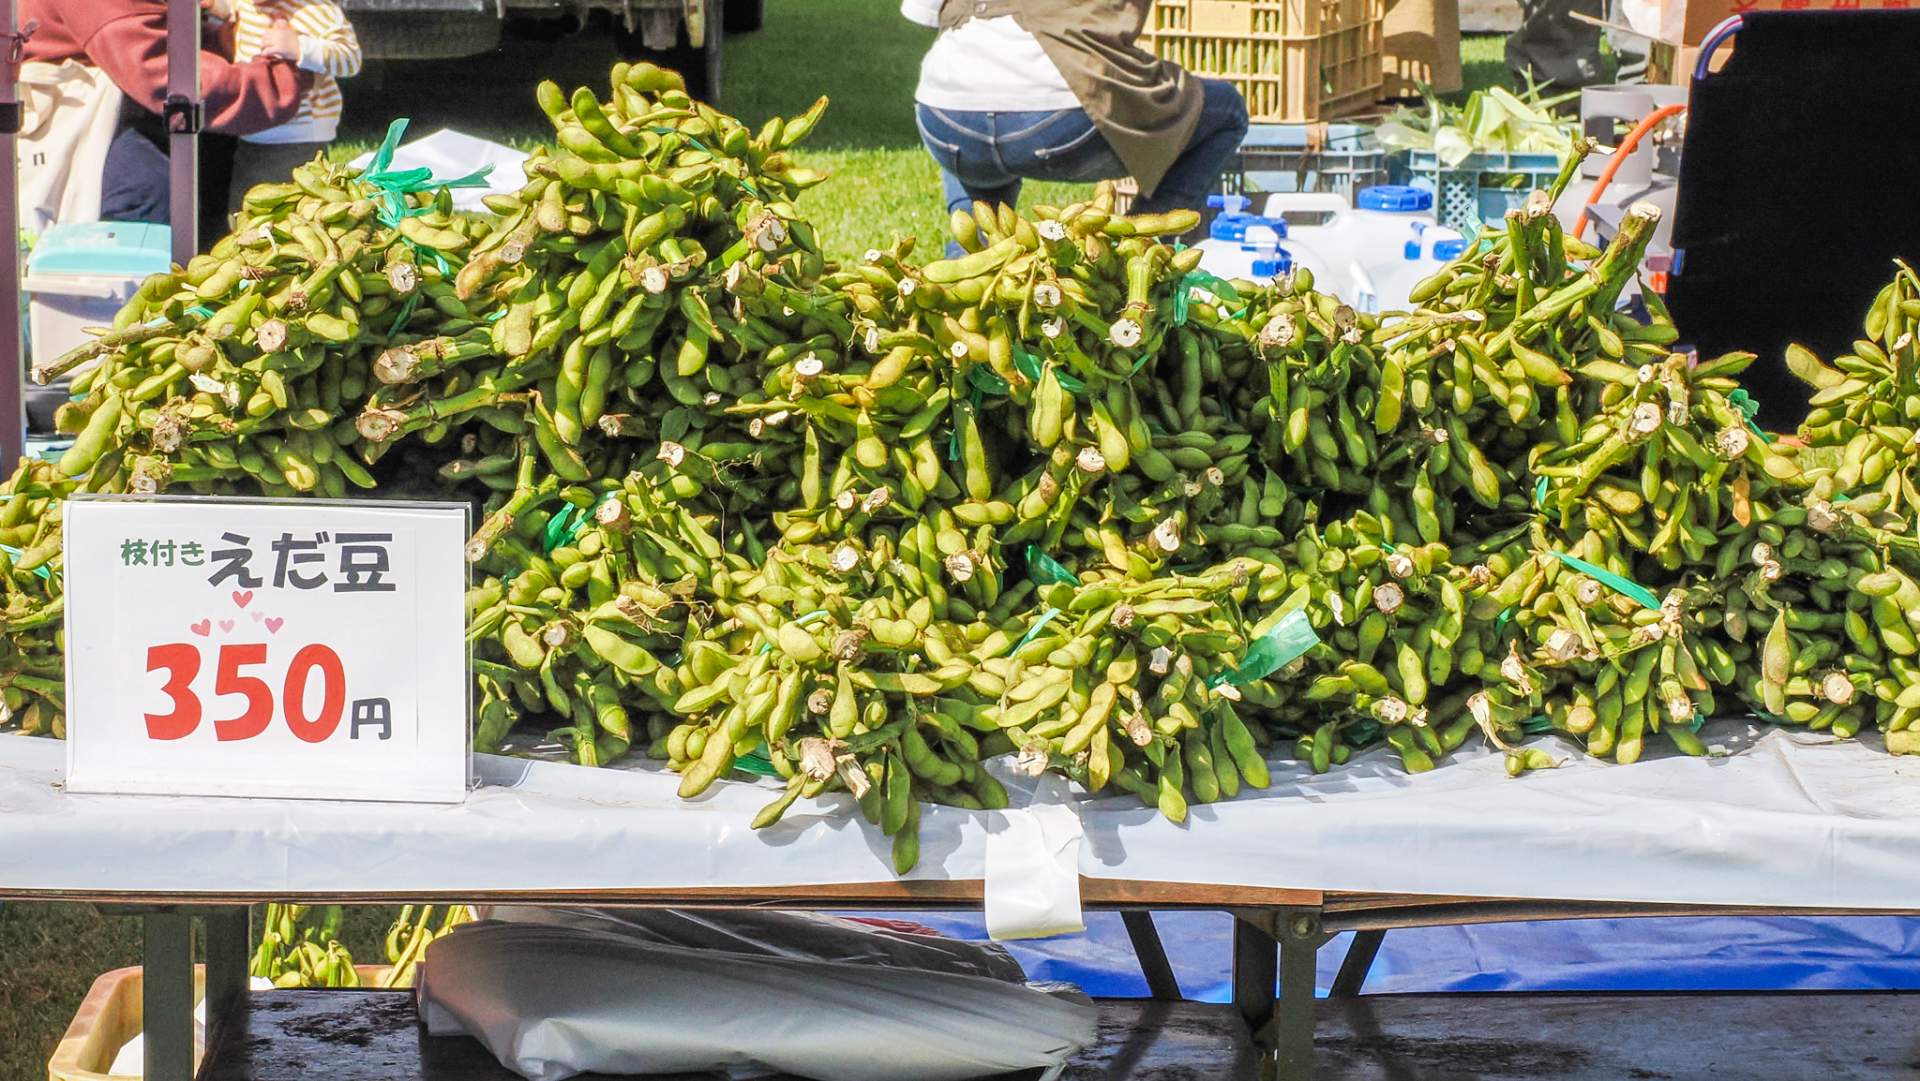 Green soybeans from Urahoro Town at the farmer's market of the Harvest Festival in Urahoro Town